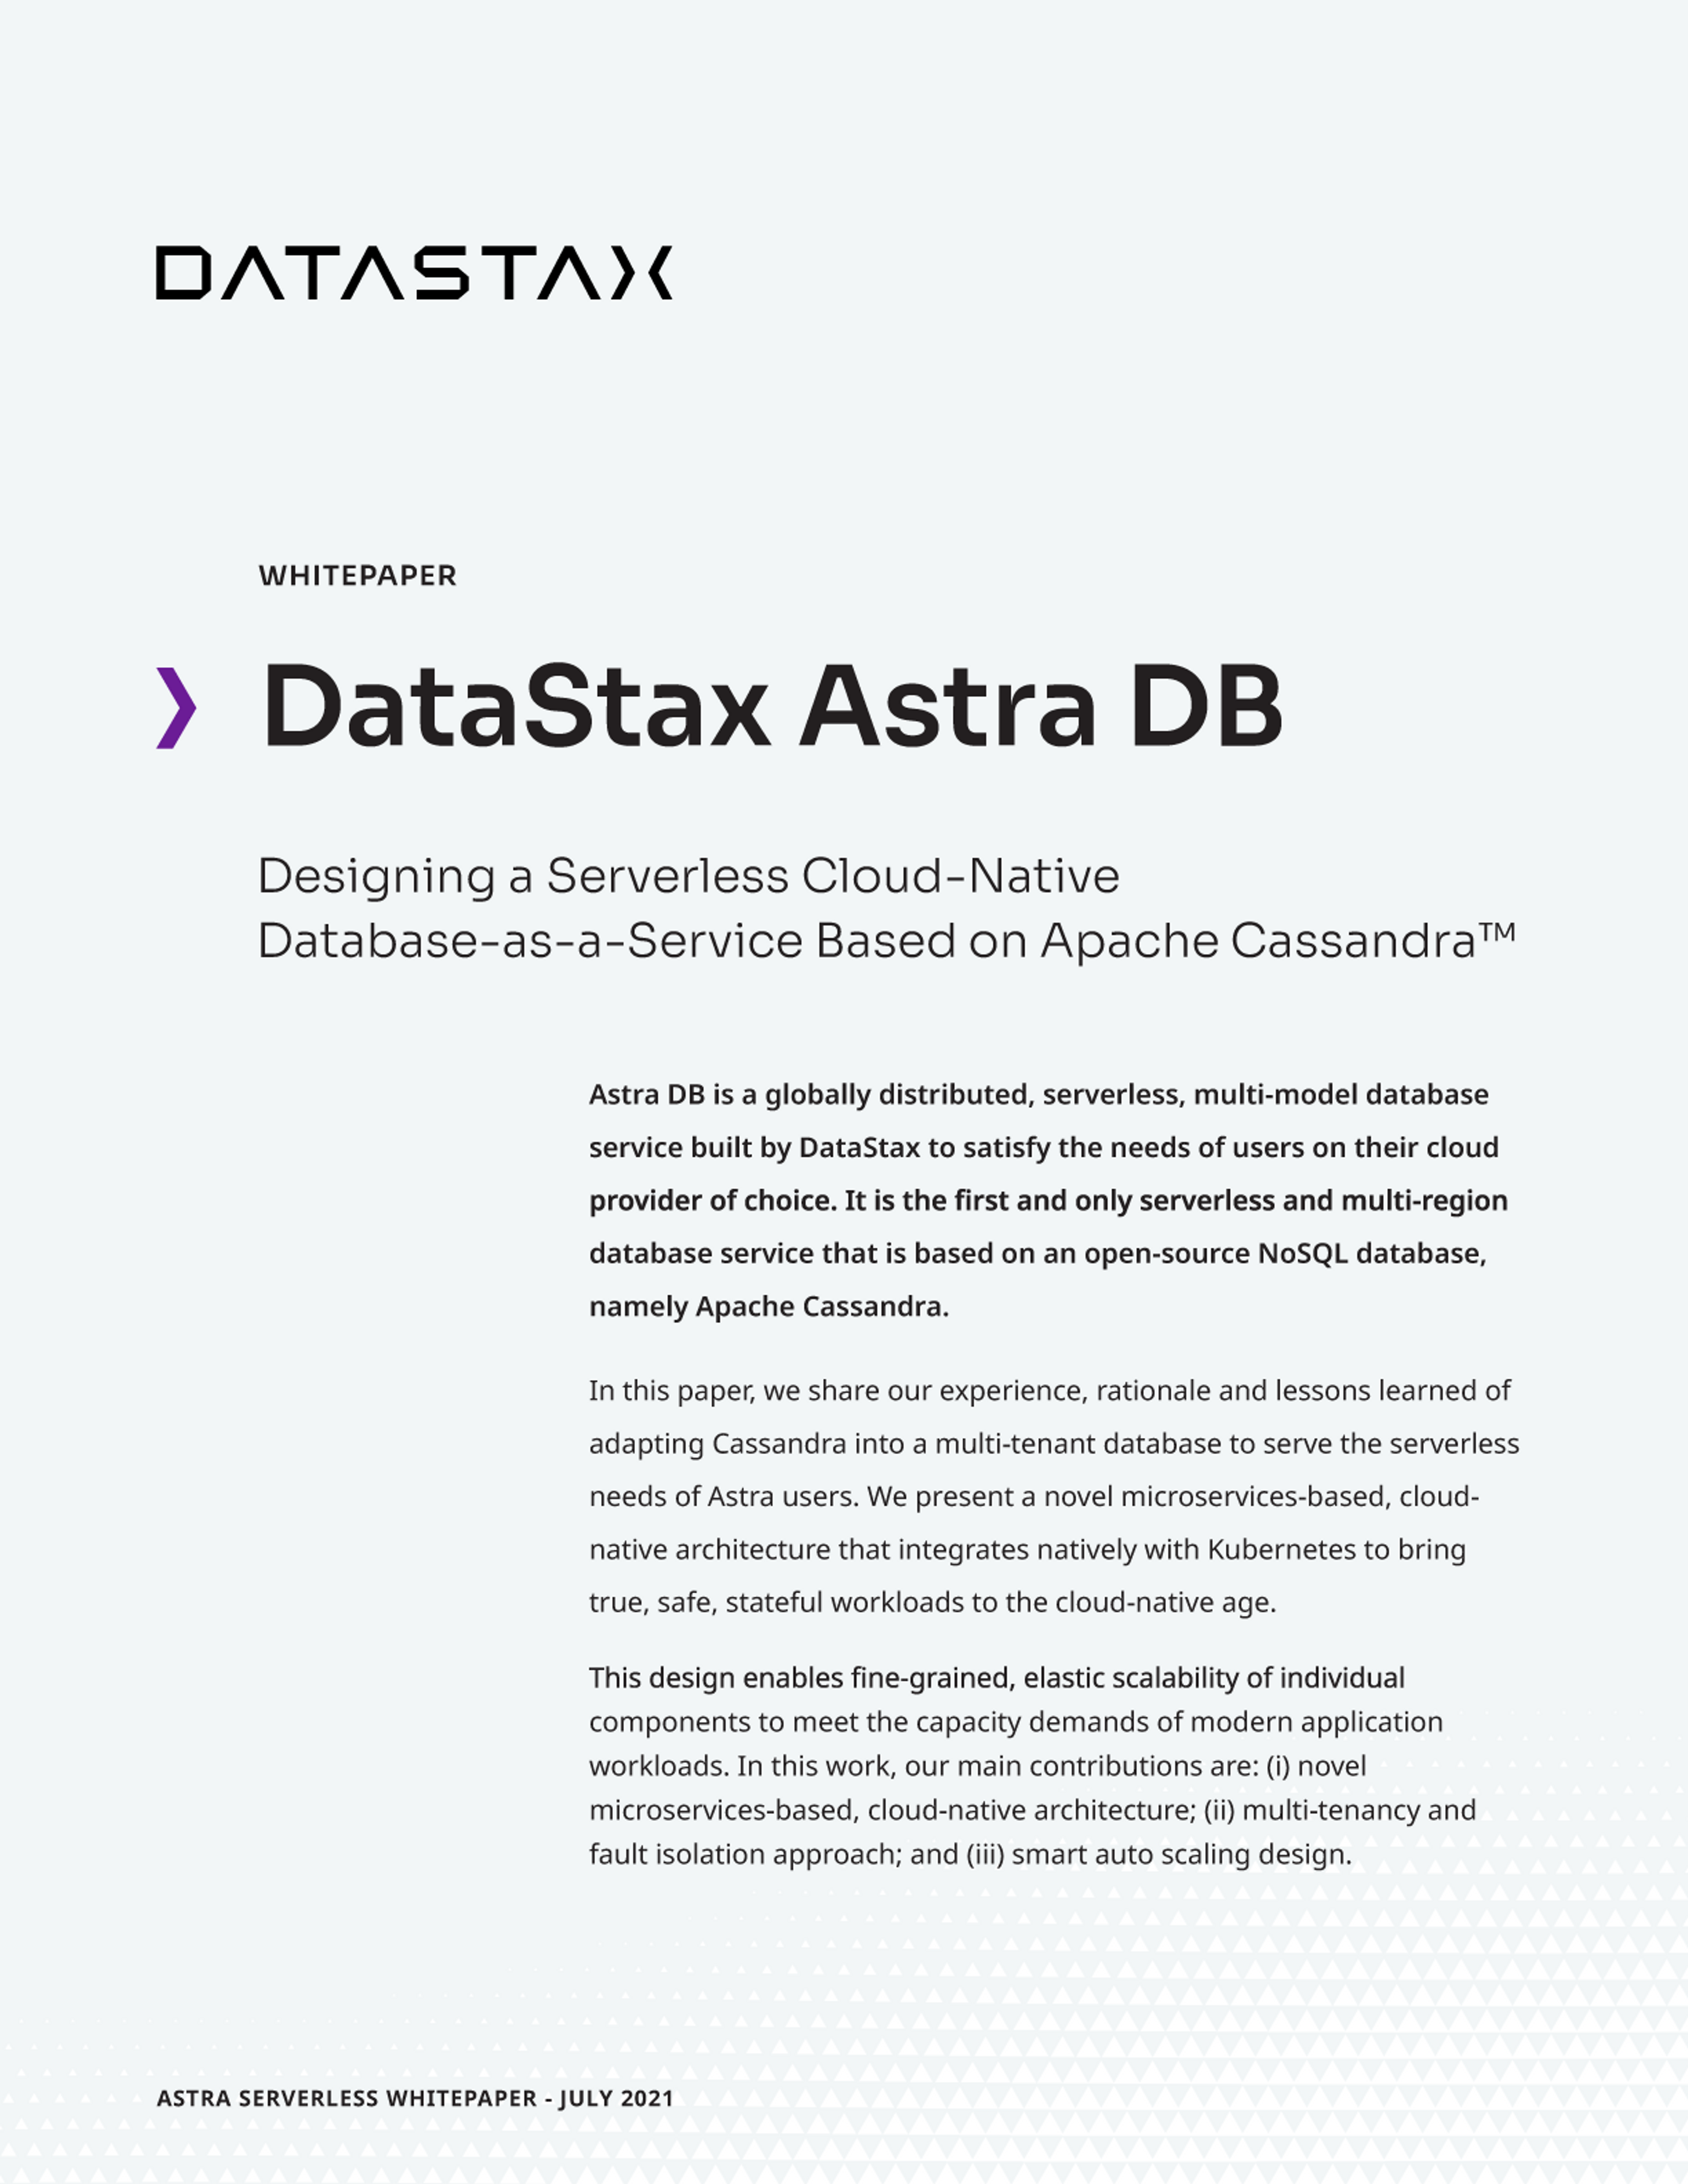 DataStax Astra DB: Designing a Serverless Cloud-Native Database-as-a-Service